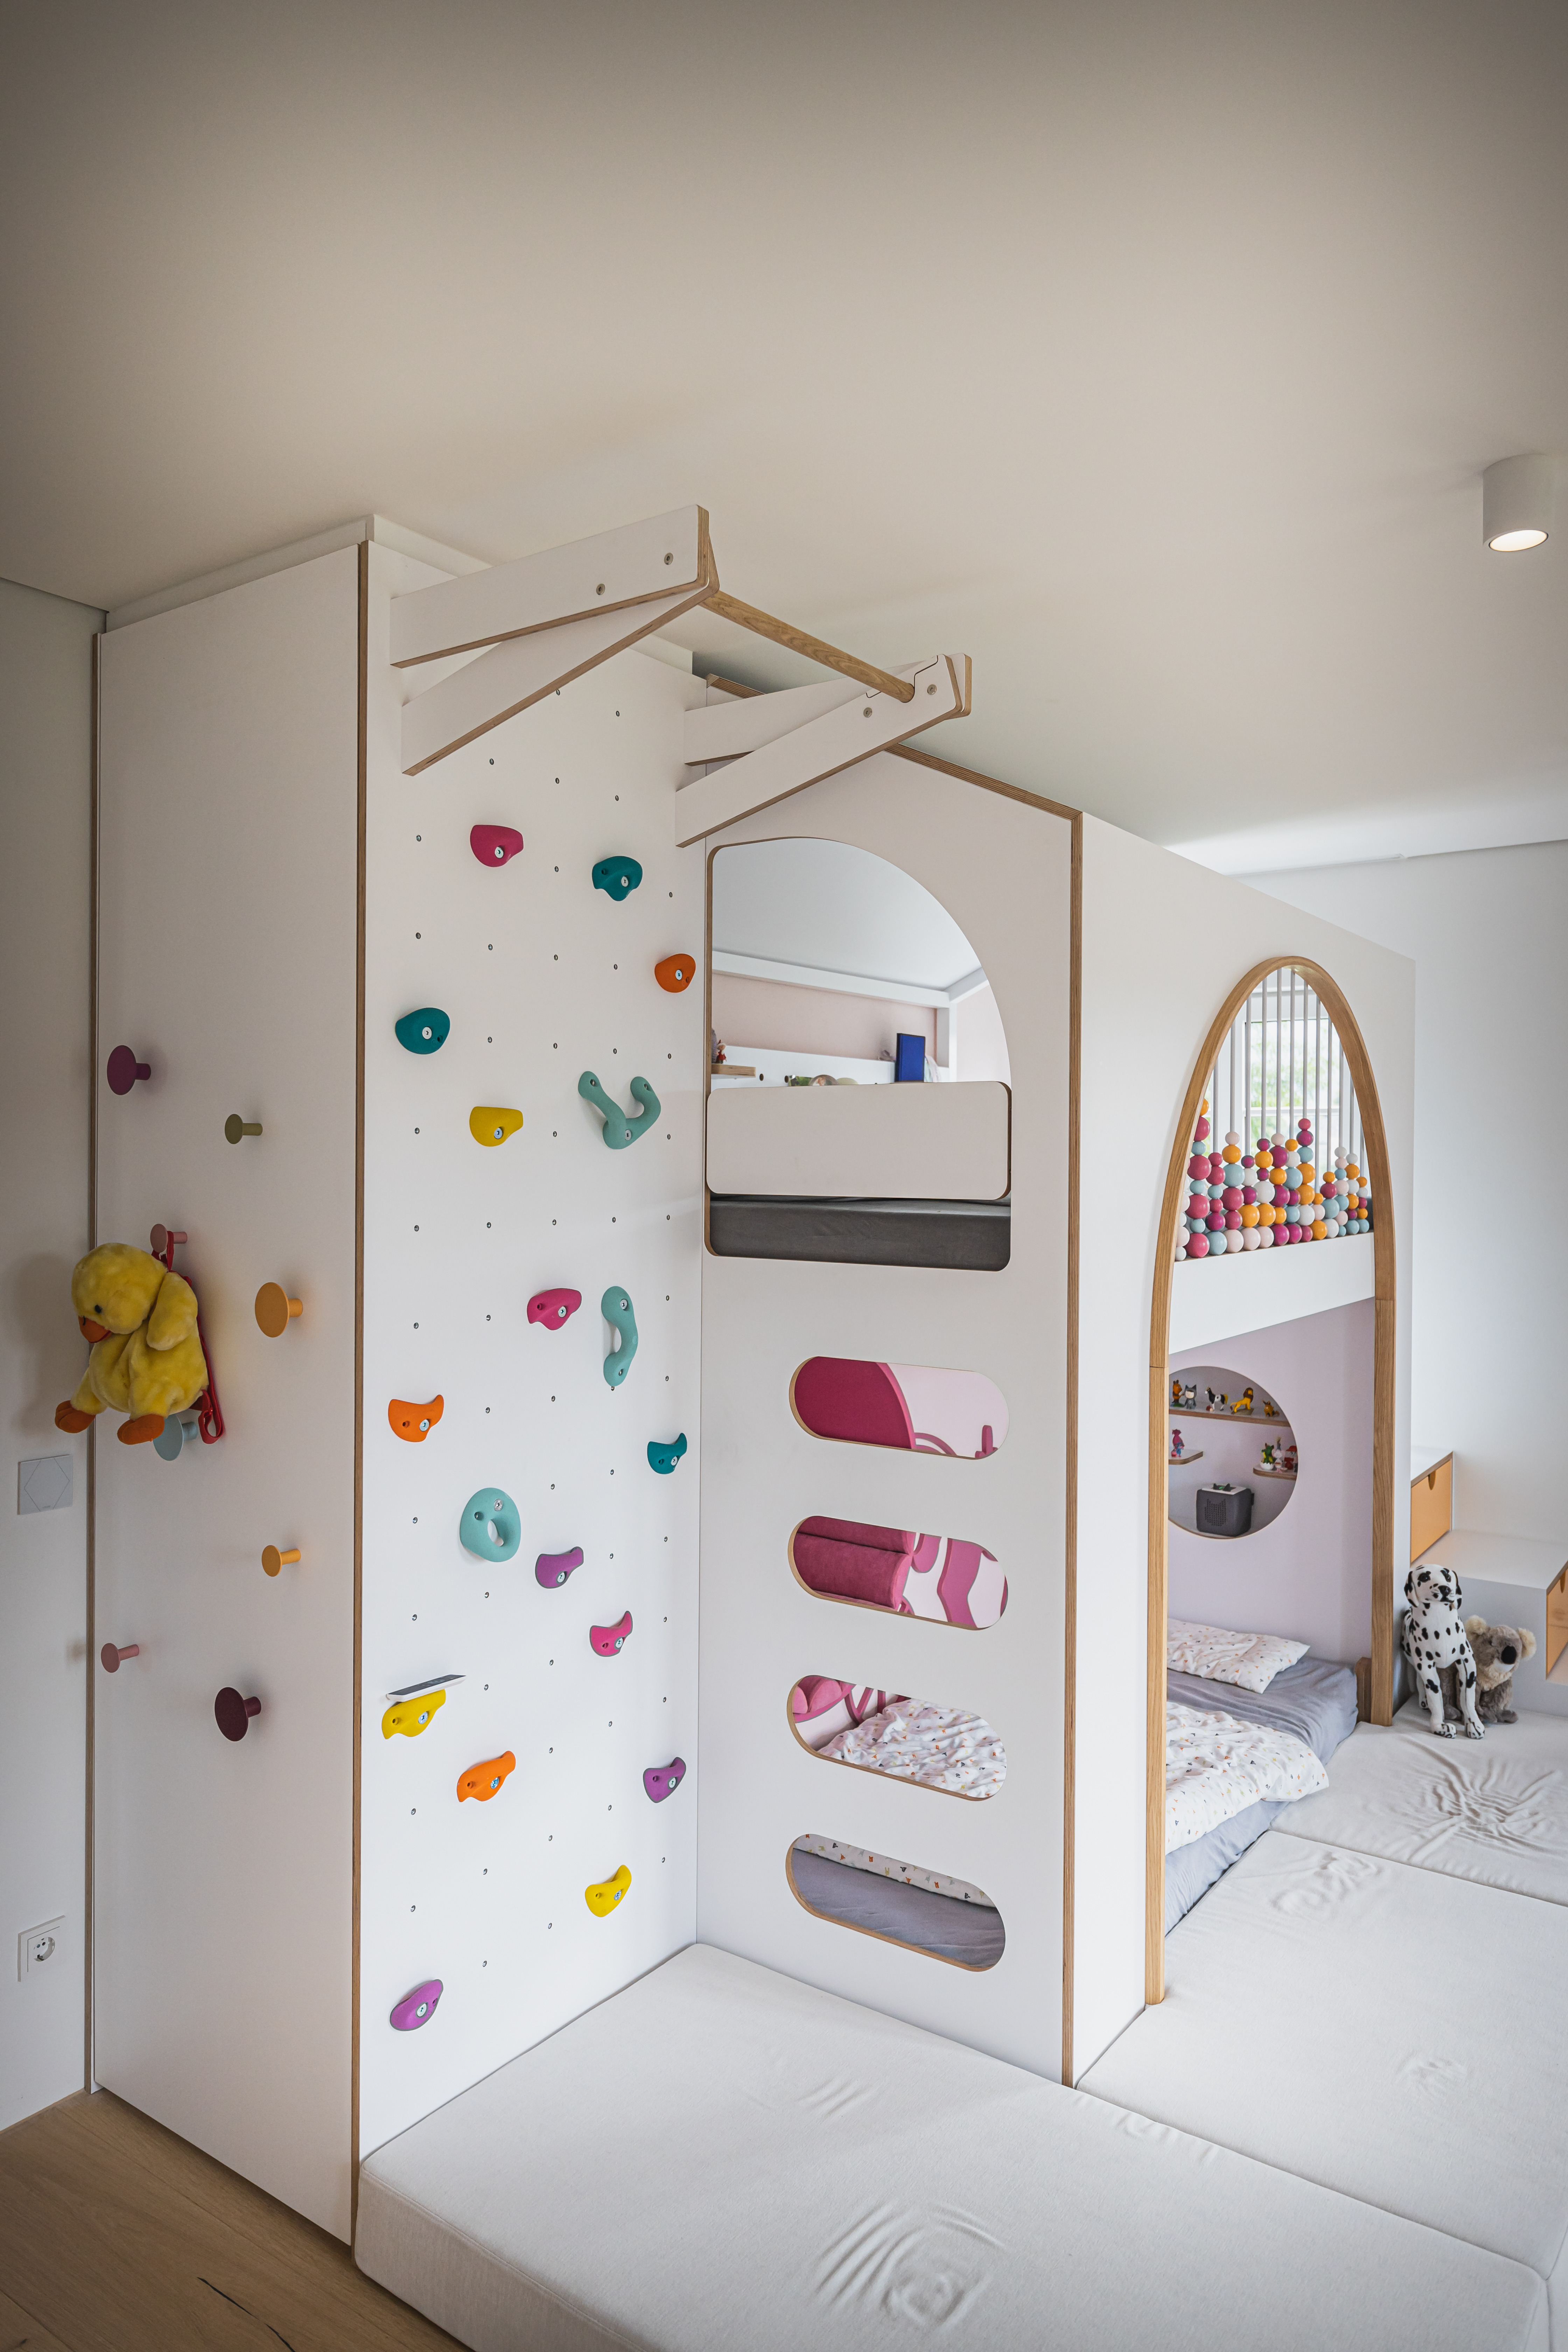 No wish remains unfulfilled here: Loft bed, storage space and climbing wall in the children's room. 